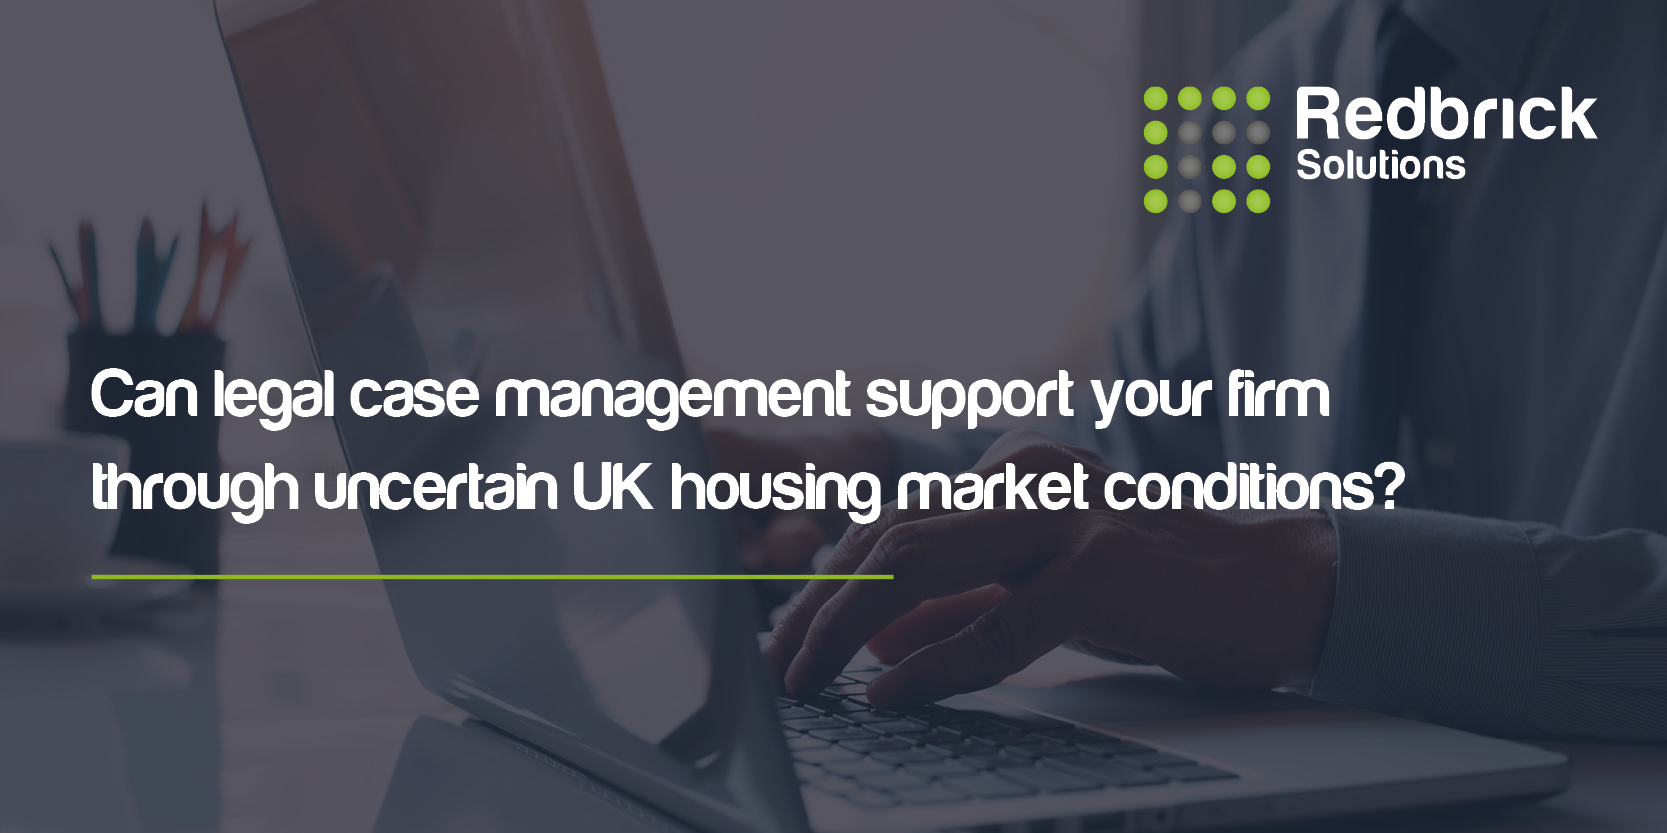 Can legal case management support your firm through uncertain UK housing market conditions?